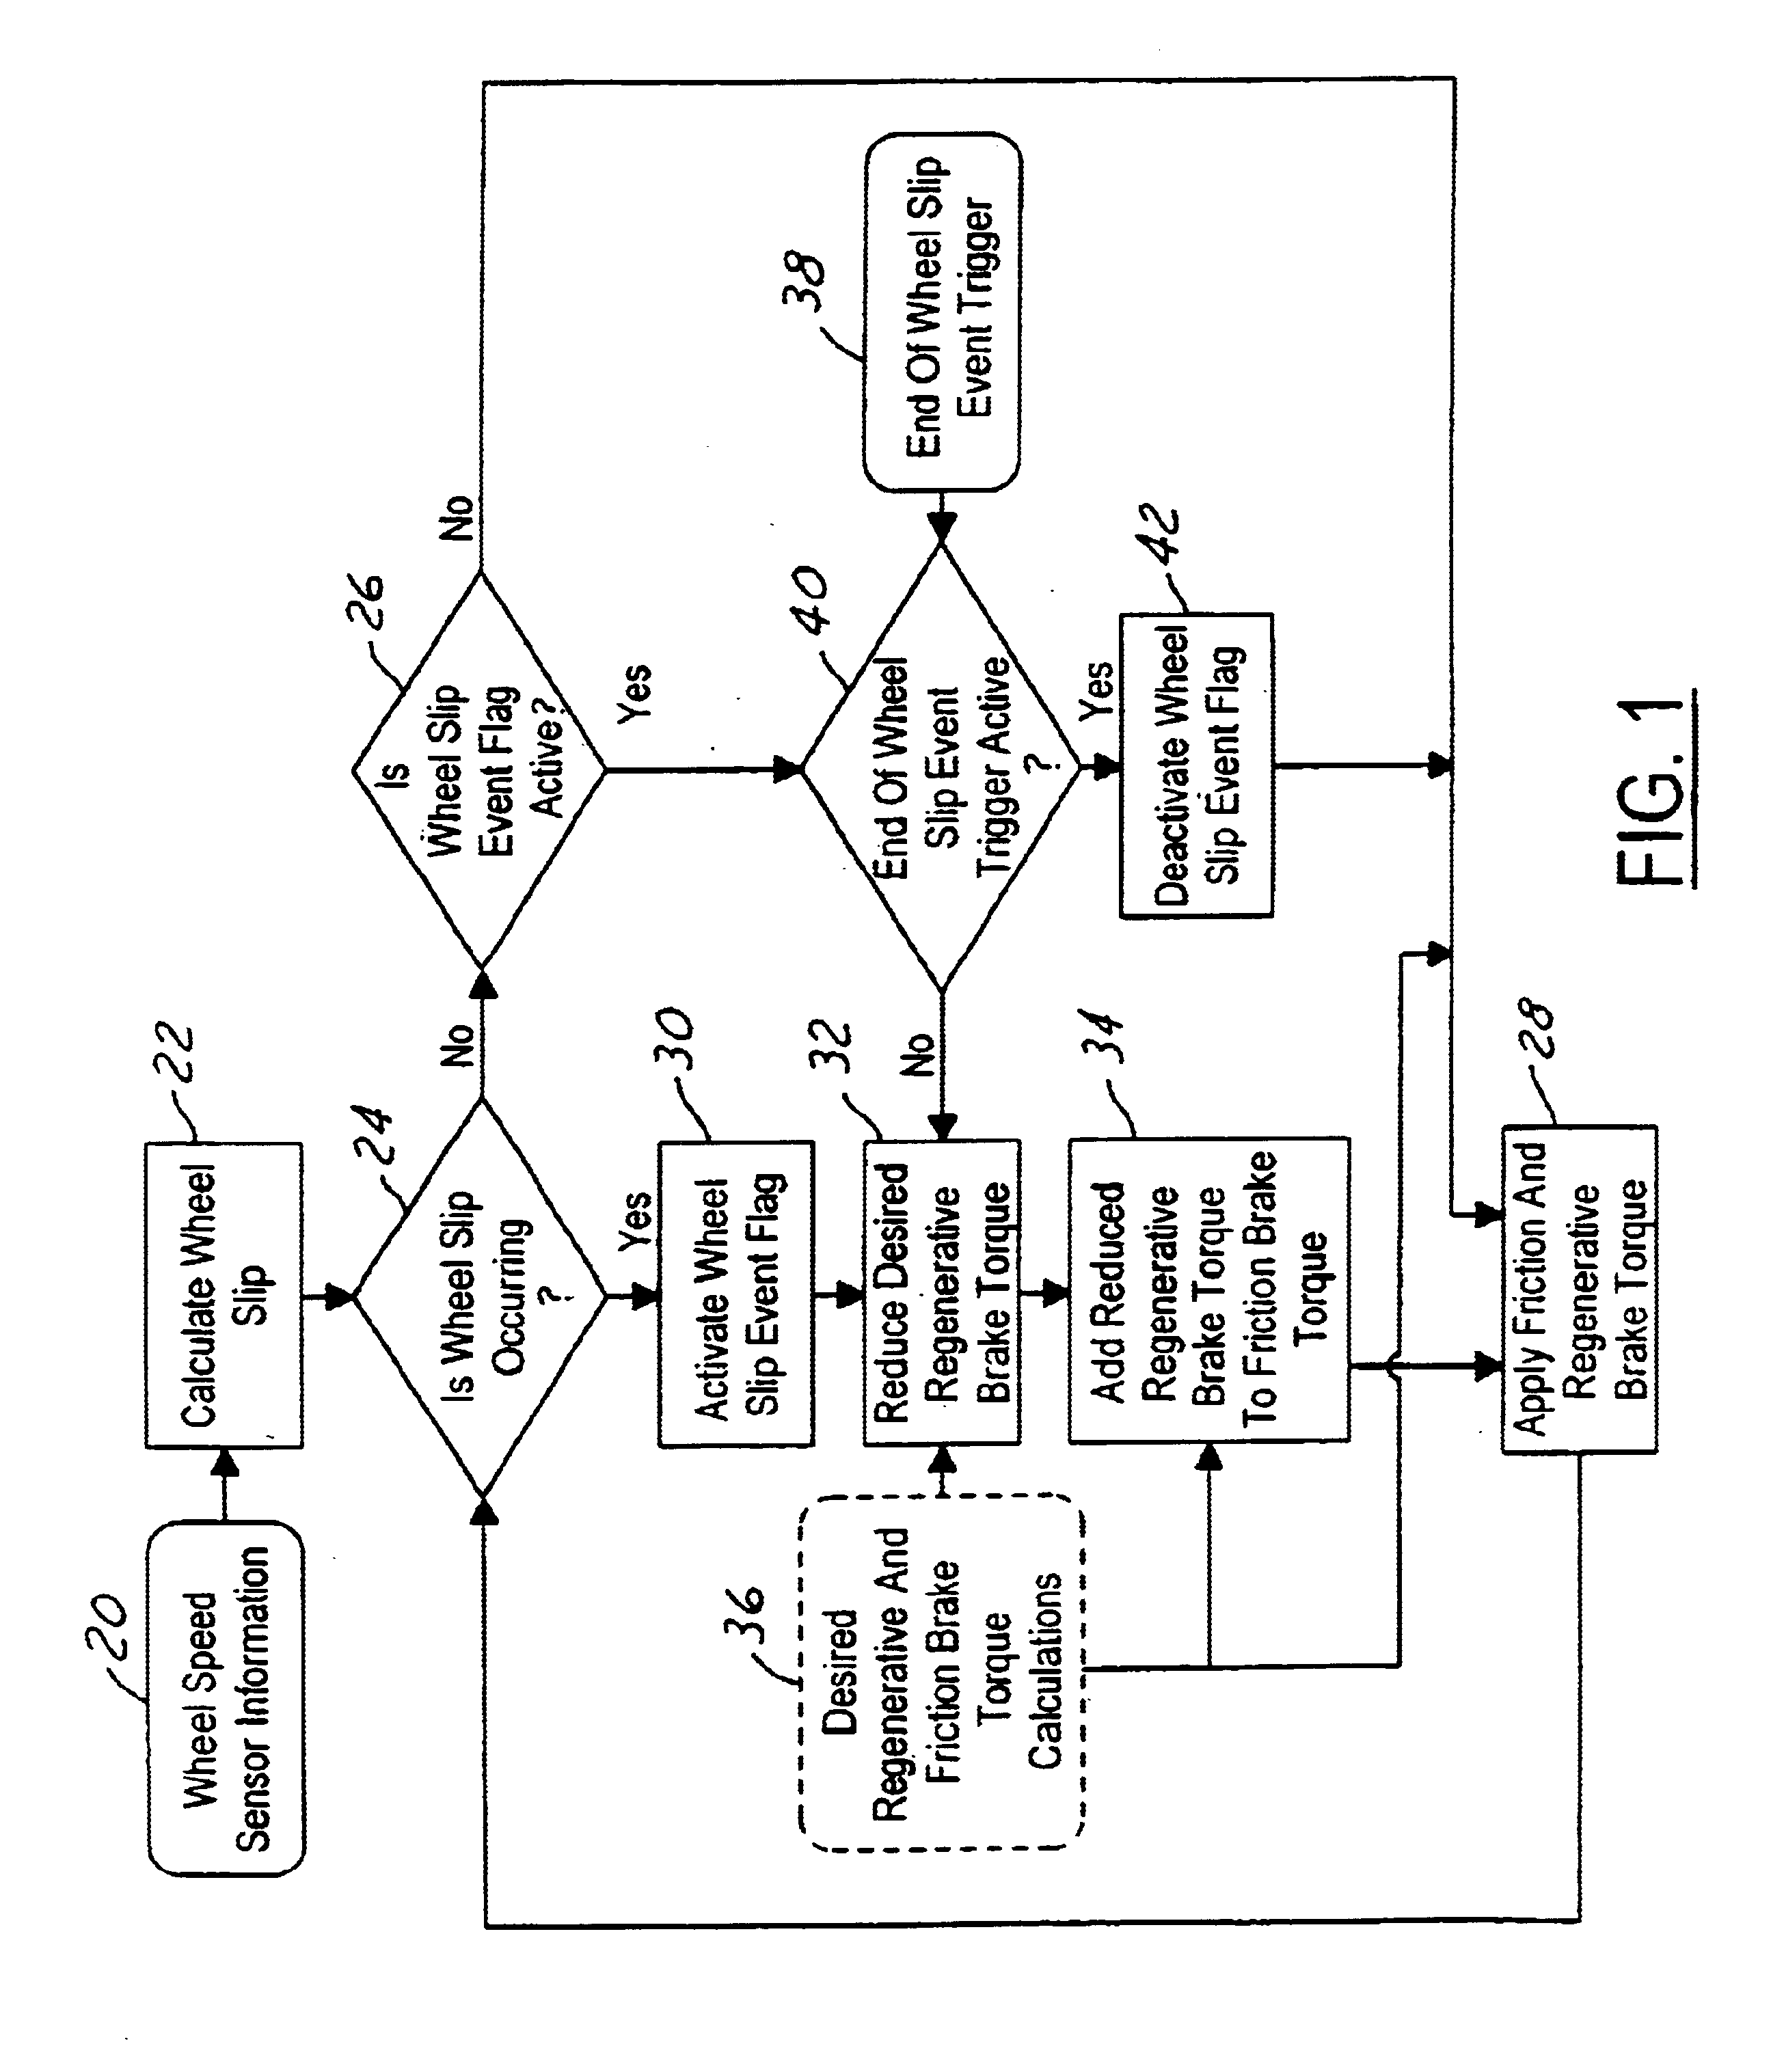 System and method for braking an electric drive vehicle on a low Mu surface